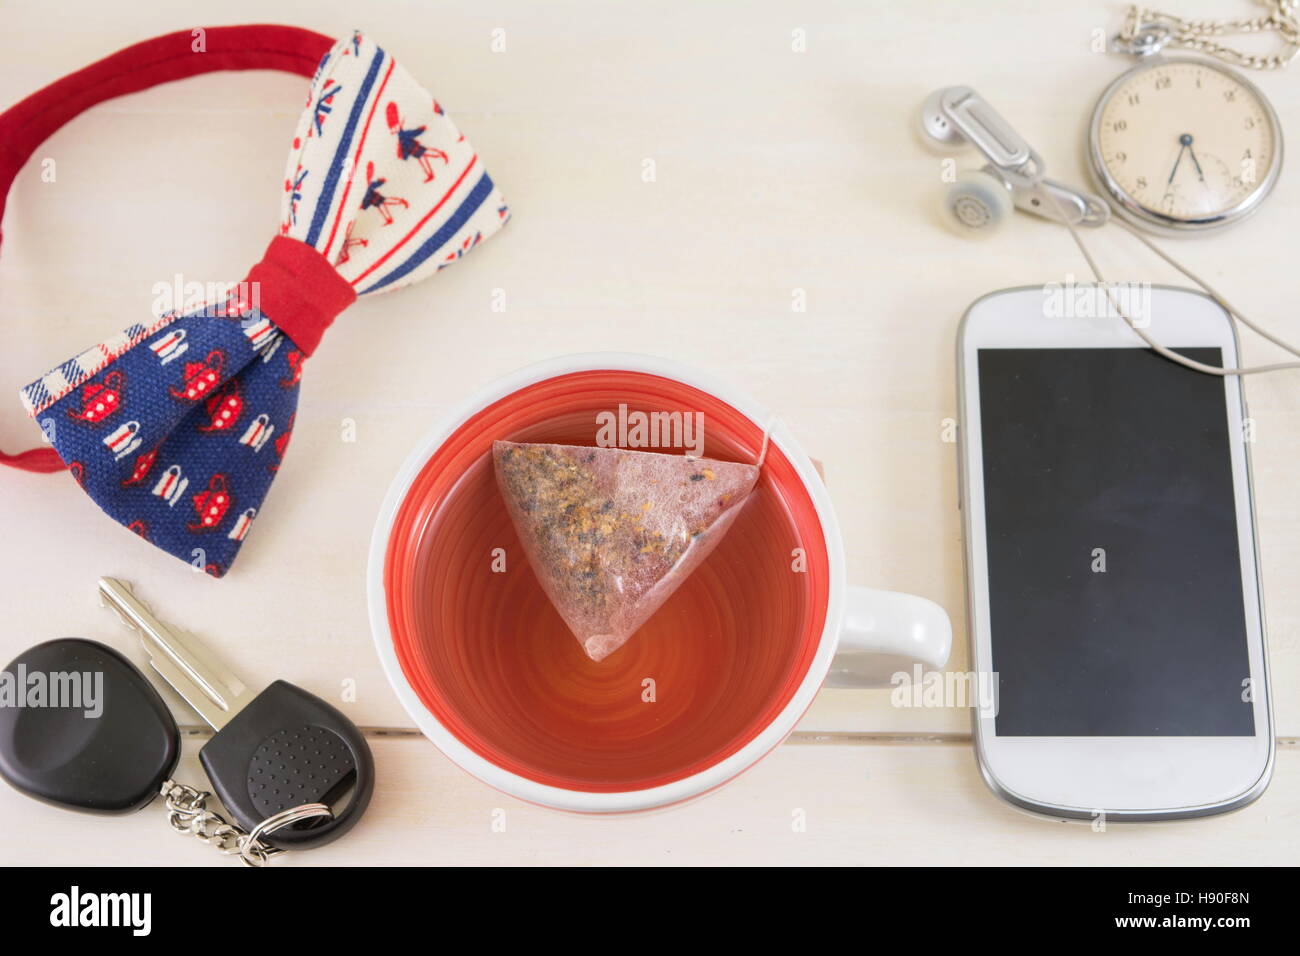 Cup of tea and accessories for a successful day Stock Photo